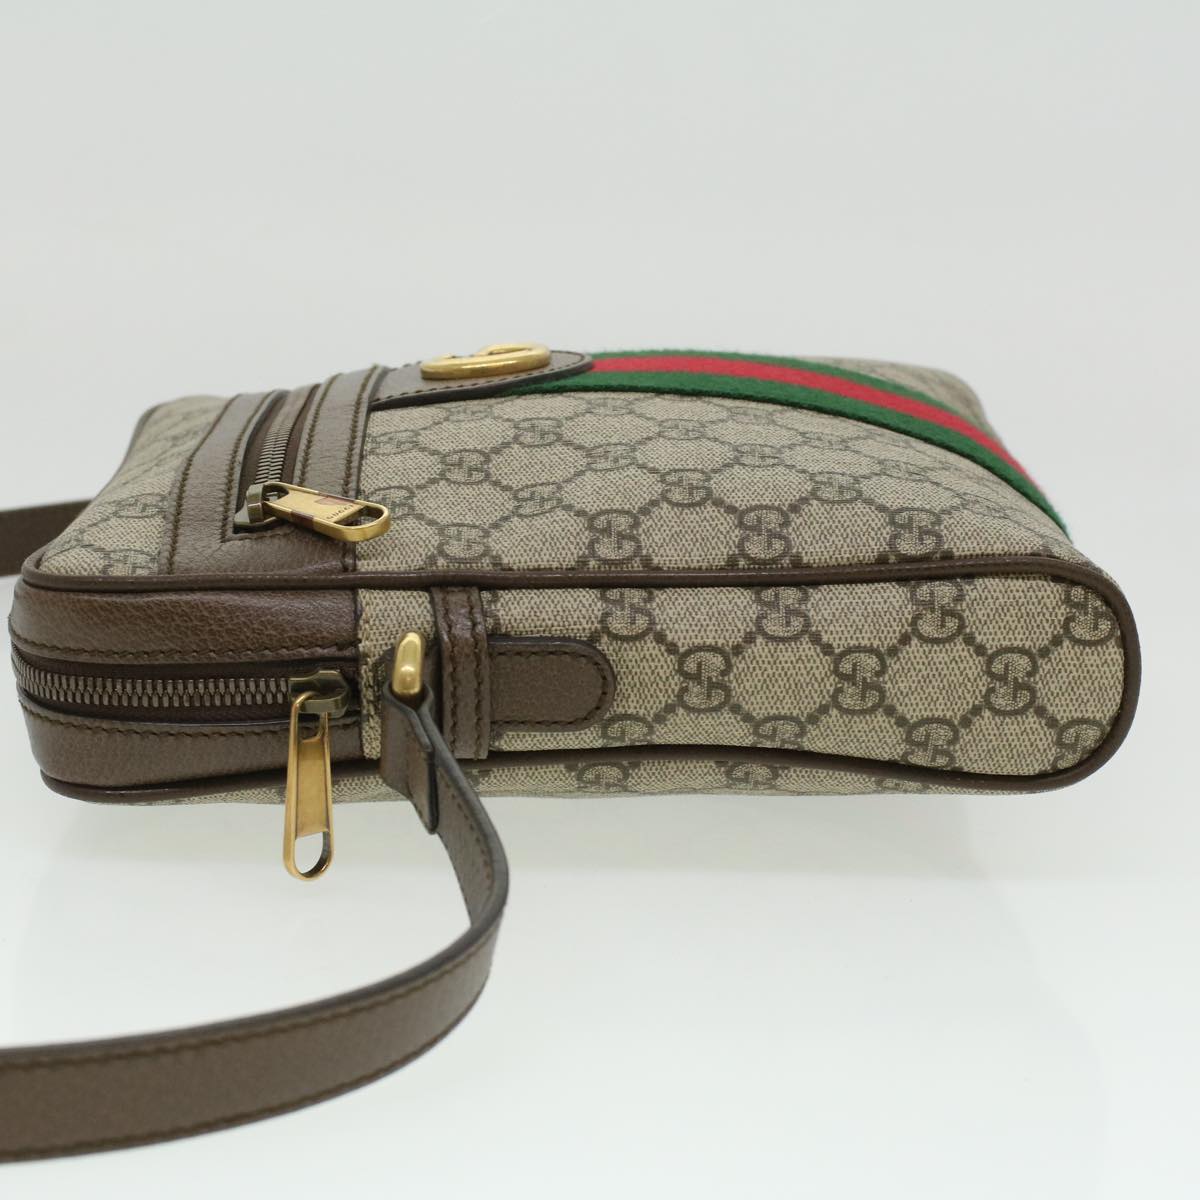 GUCCI GG Canvas Web Sherry Line Shoulder Bag Beige Red Green Auth lt689